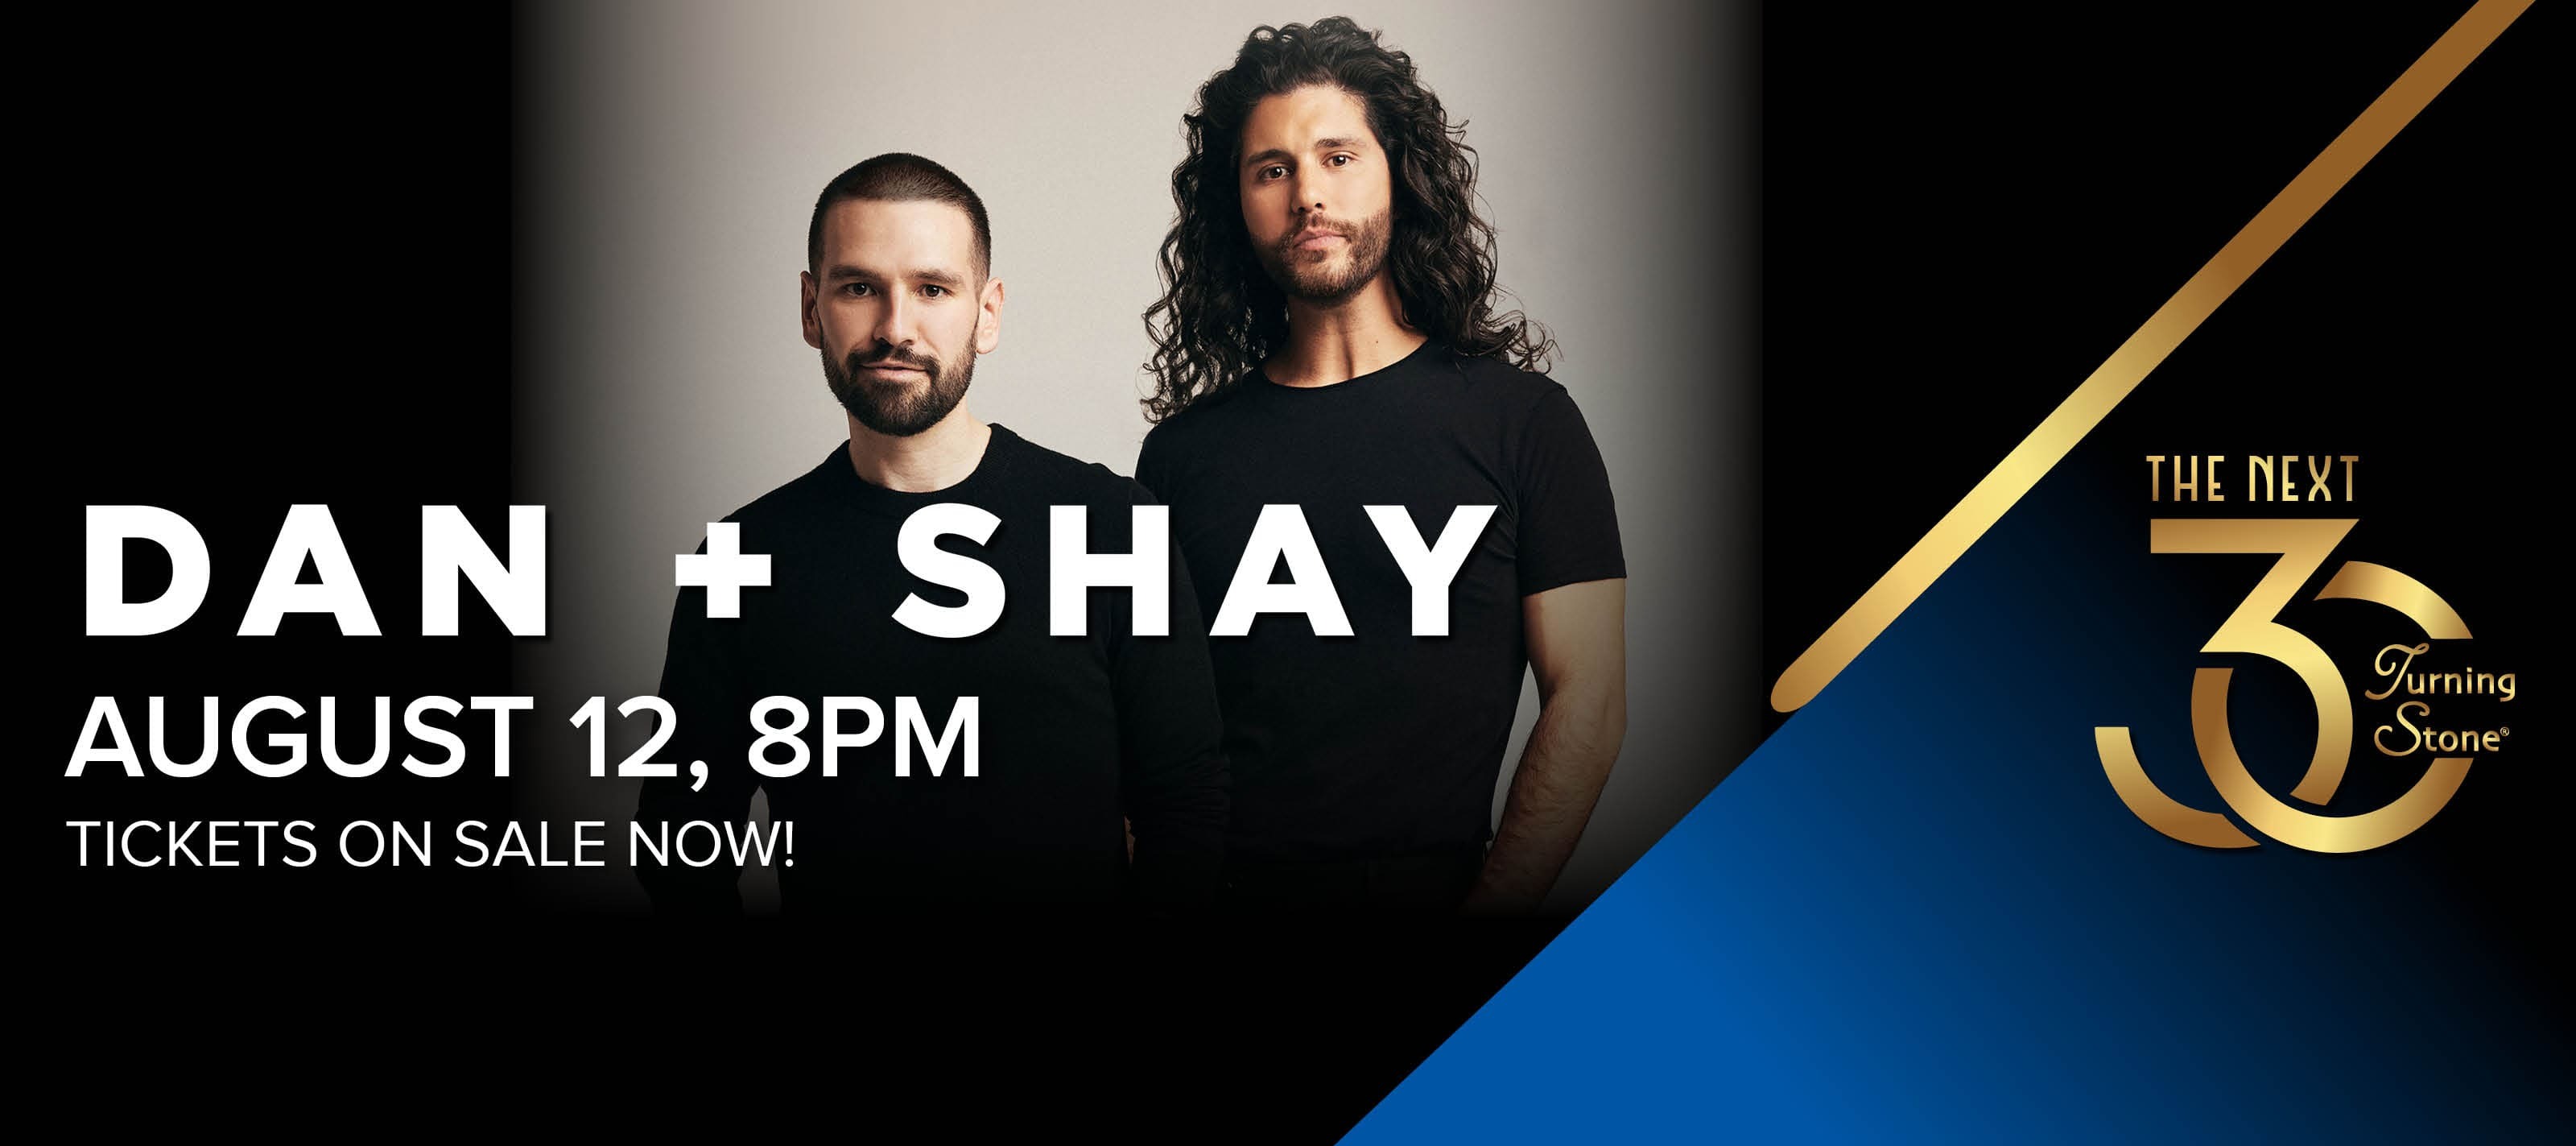 Dan + Shay August 12 8pm Tickets On Sale Now